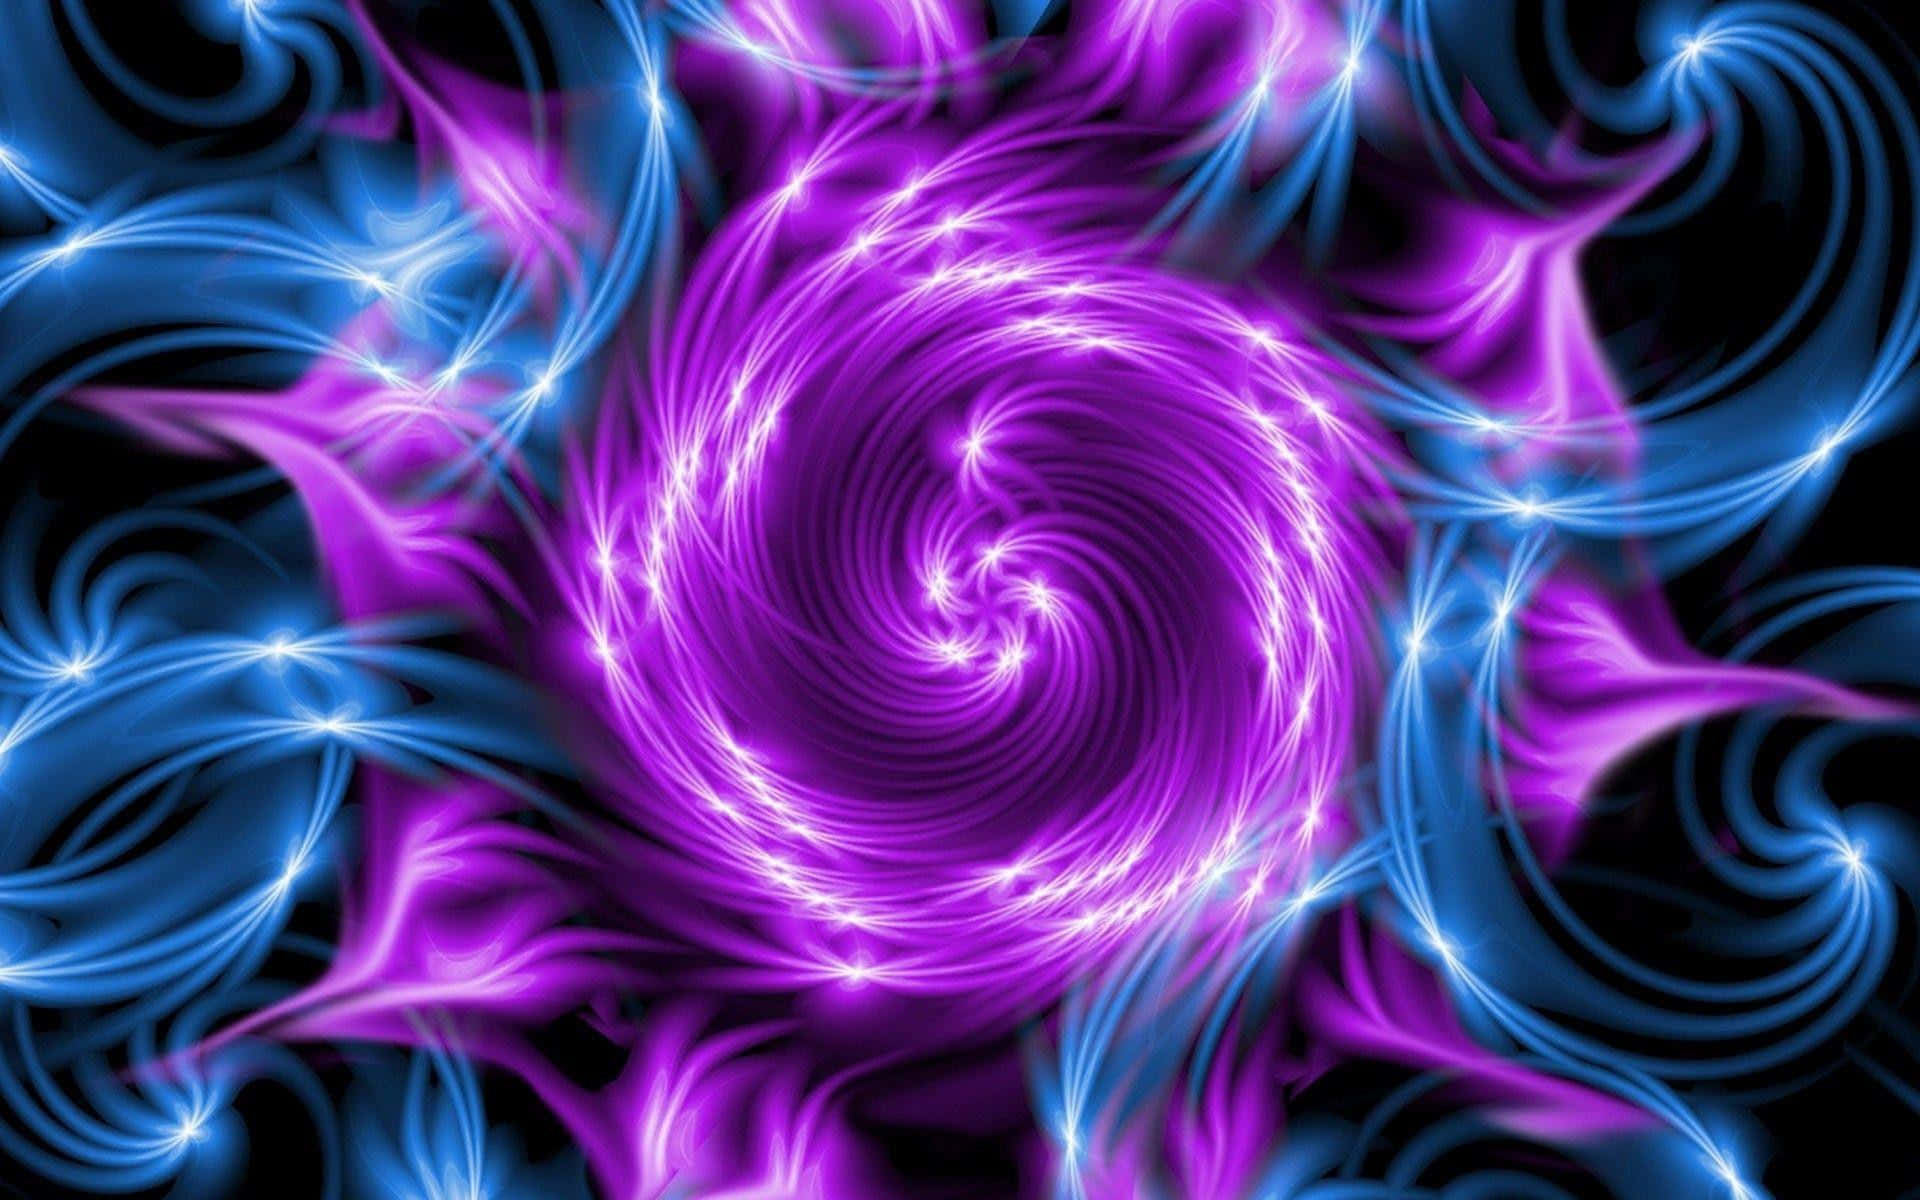 Purple And Blue Swirling Spiral Animation